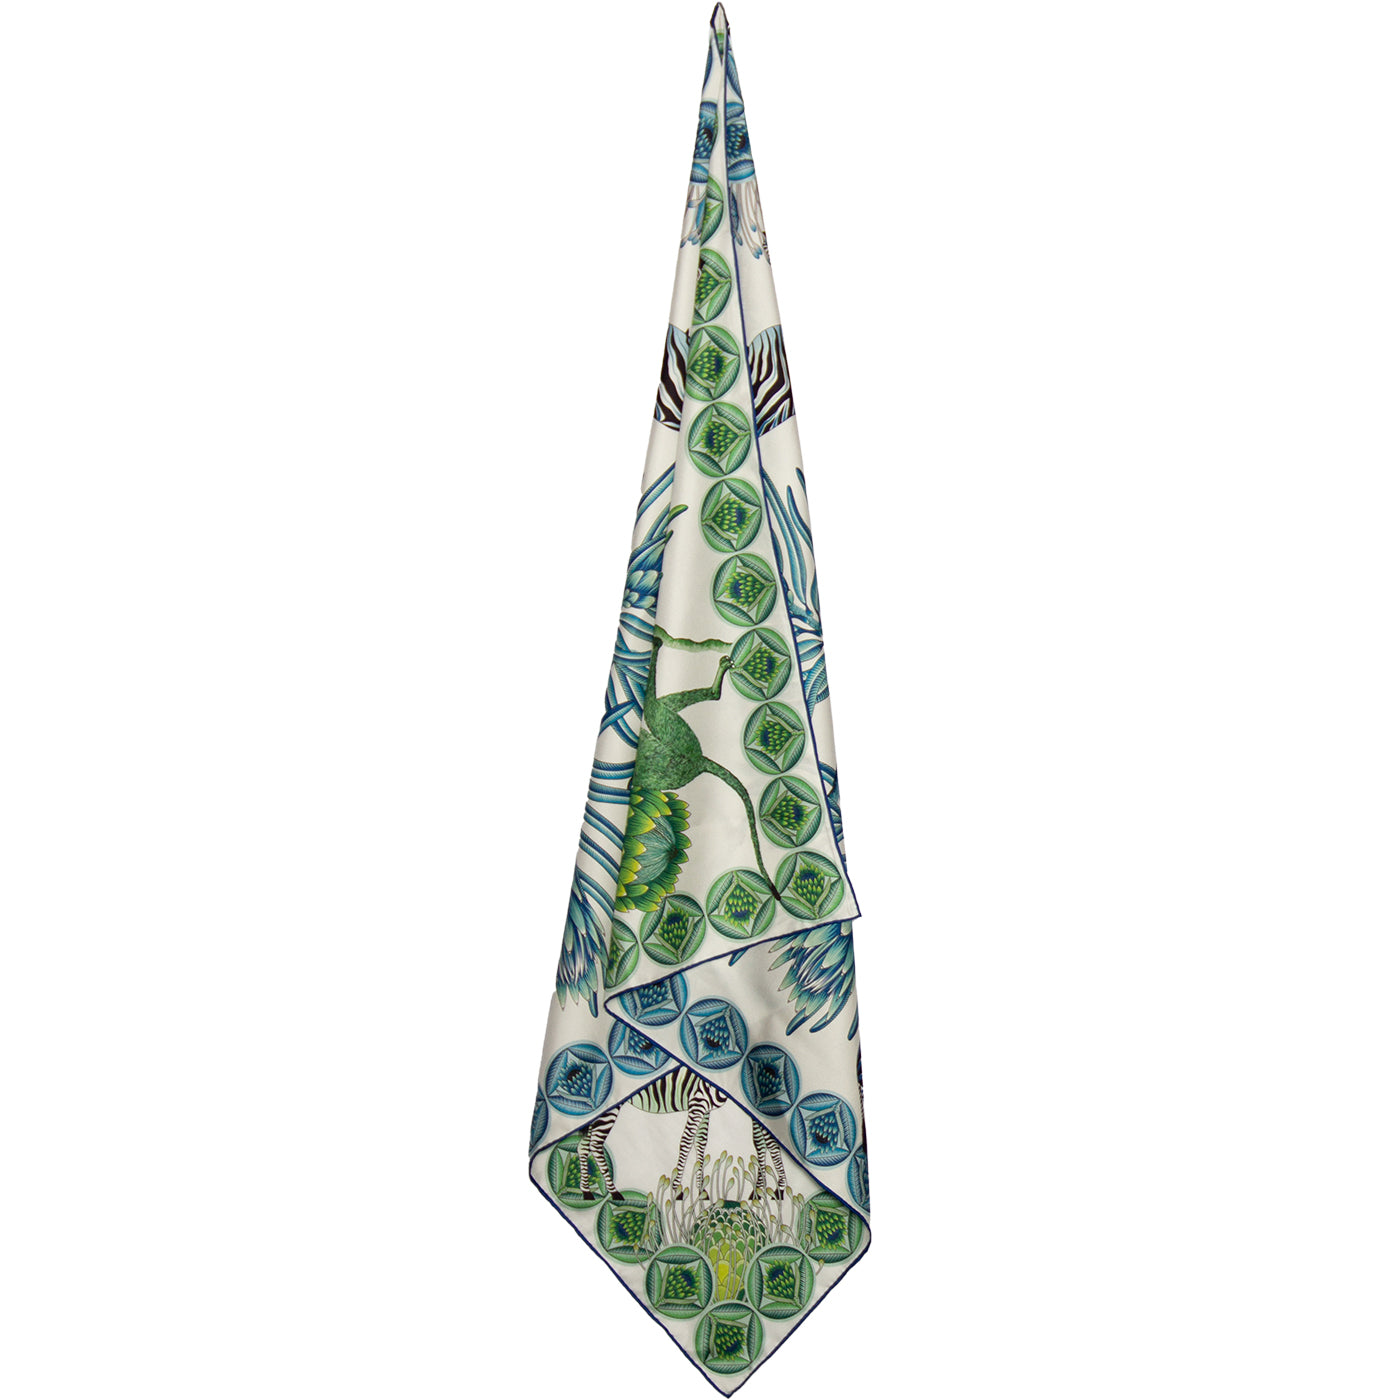 Blue and green silk scarf with Zebras Monkies and Protea flowers